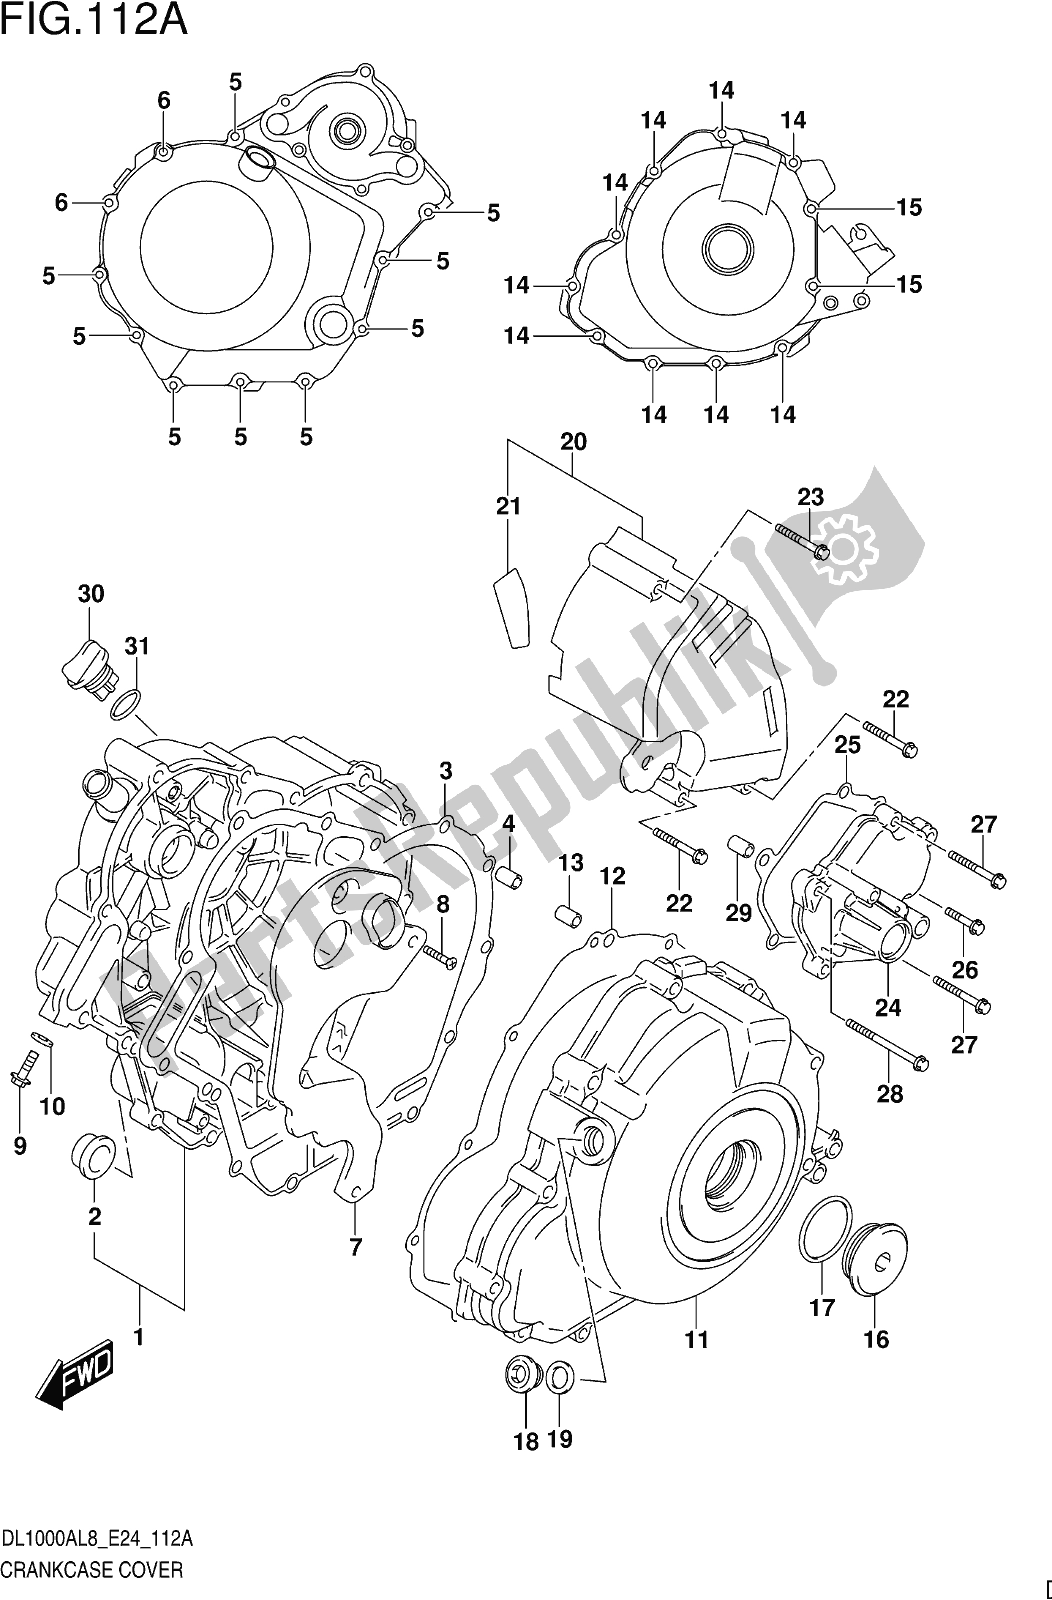 All parts for the Fig. 112a Crankcase Cover of the Suzuki DL 1000 XA 2018